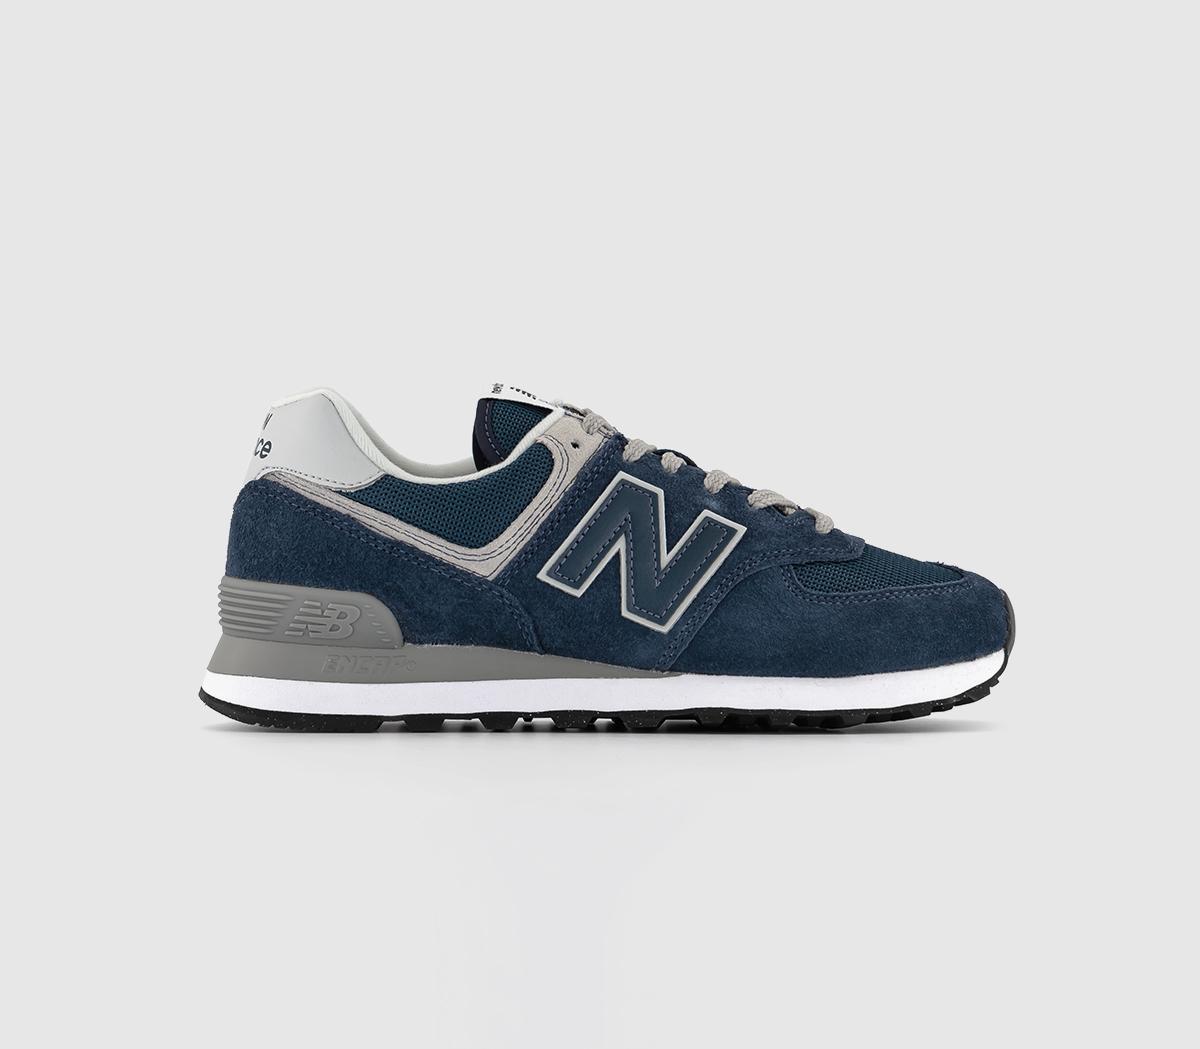 New Balance 574 Trainers Navy Grey Green Leaf - Men's Trainers